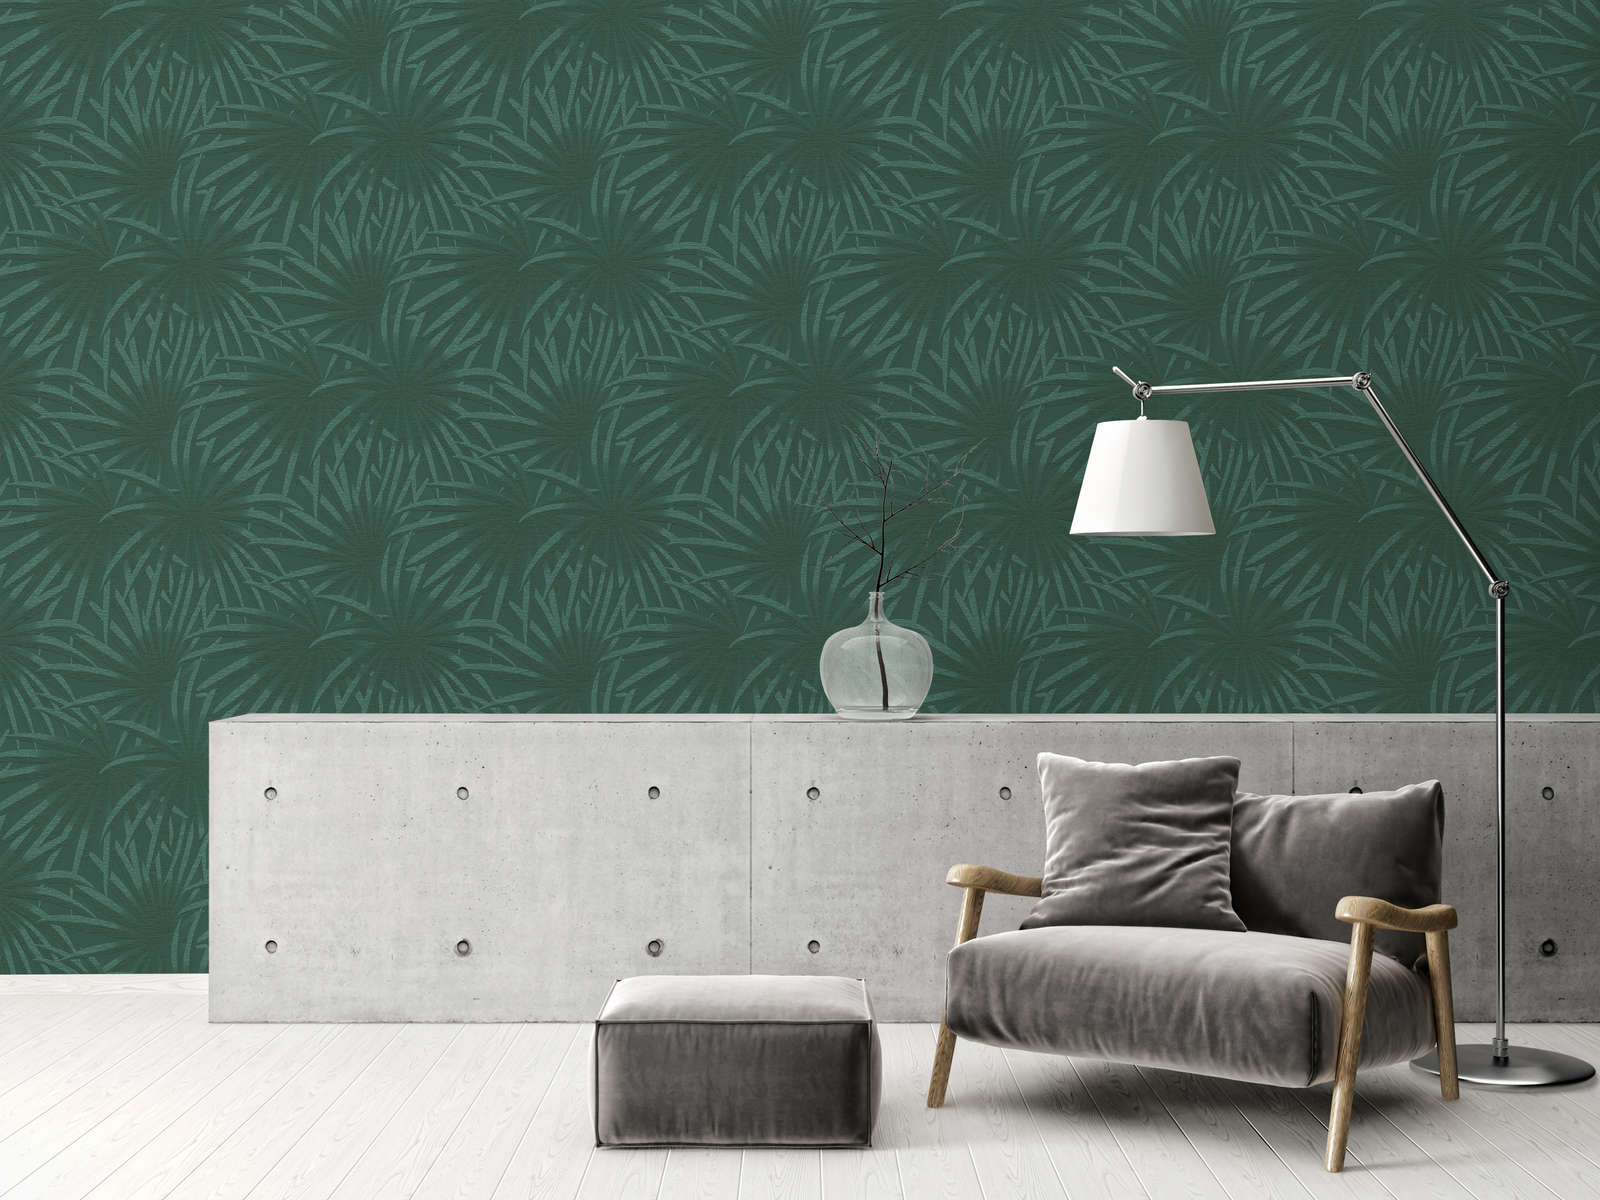             Non-woven wallpaper with jungle pattern - green
        